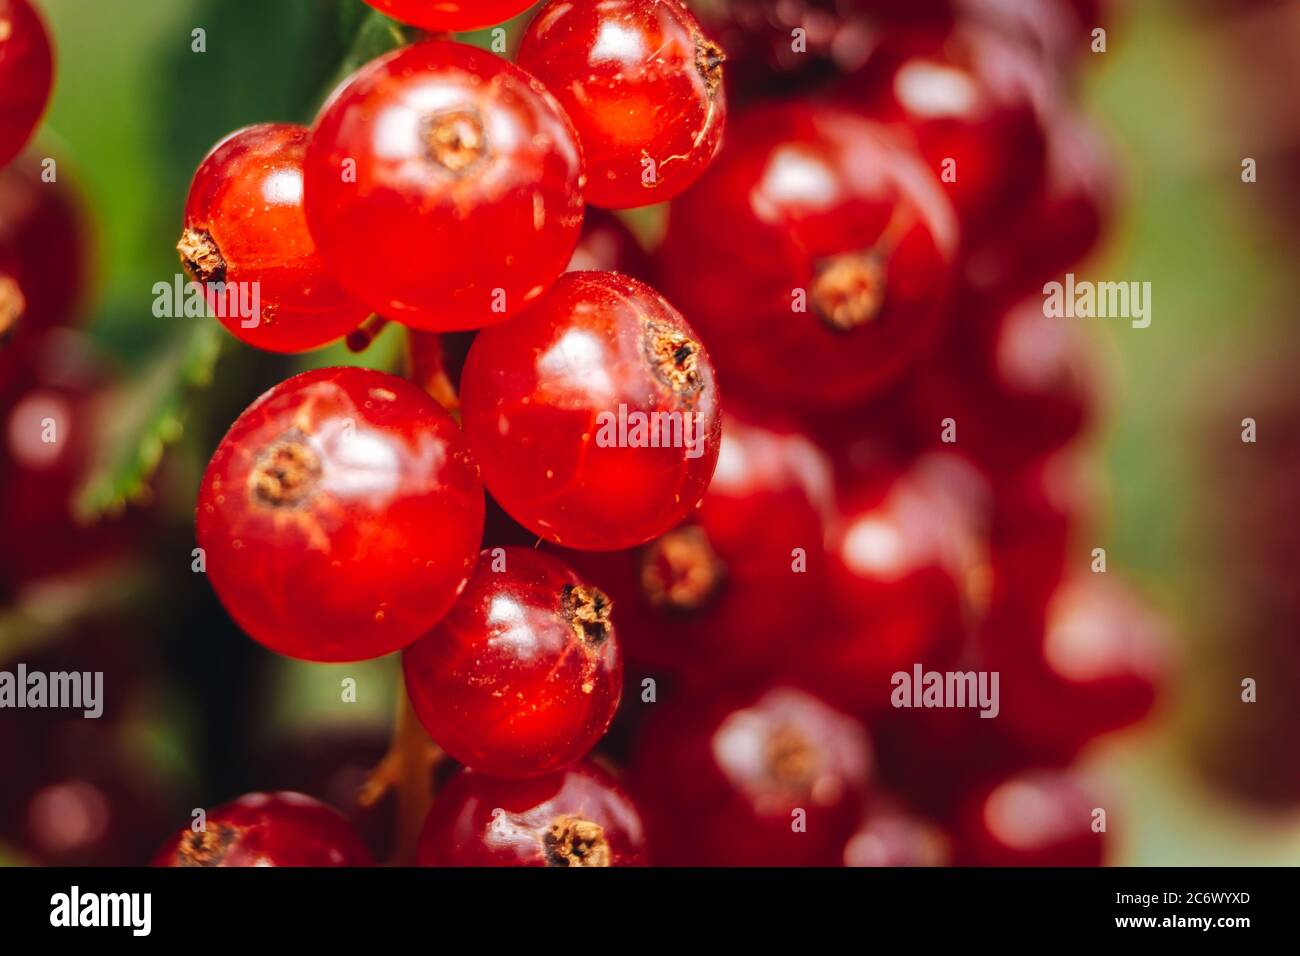 Macro shot of a red currant Stock Photo